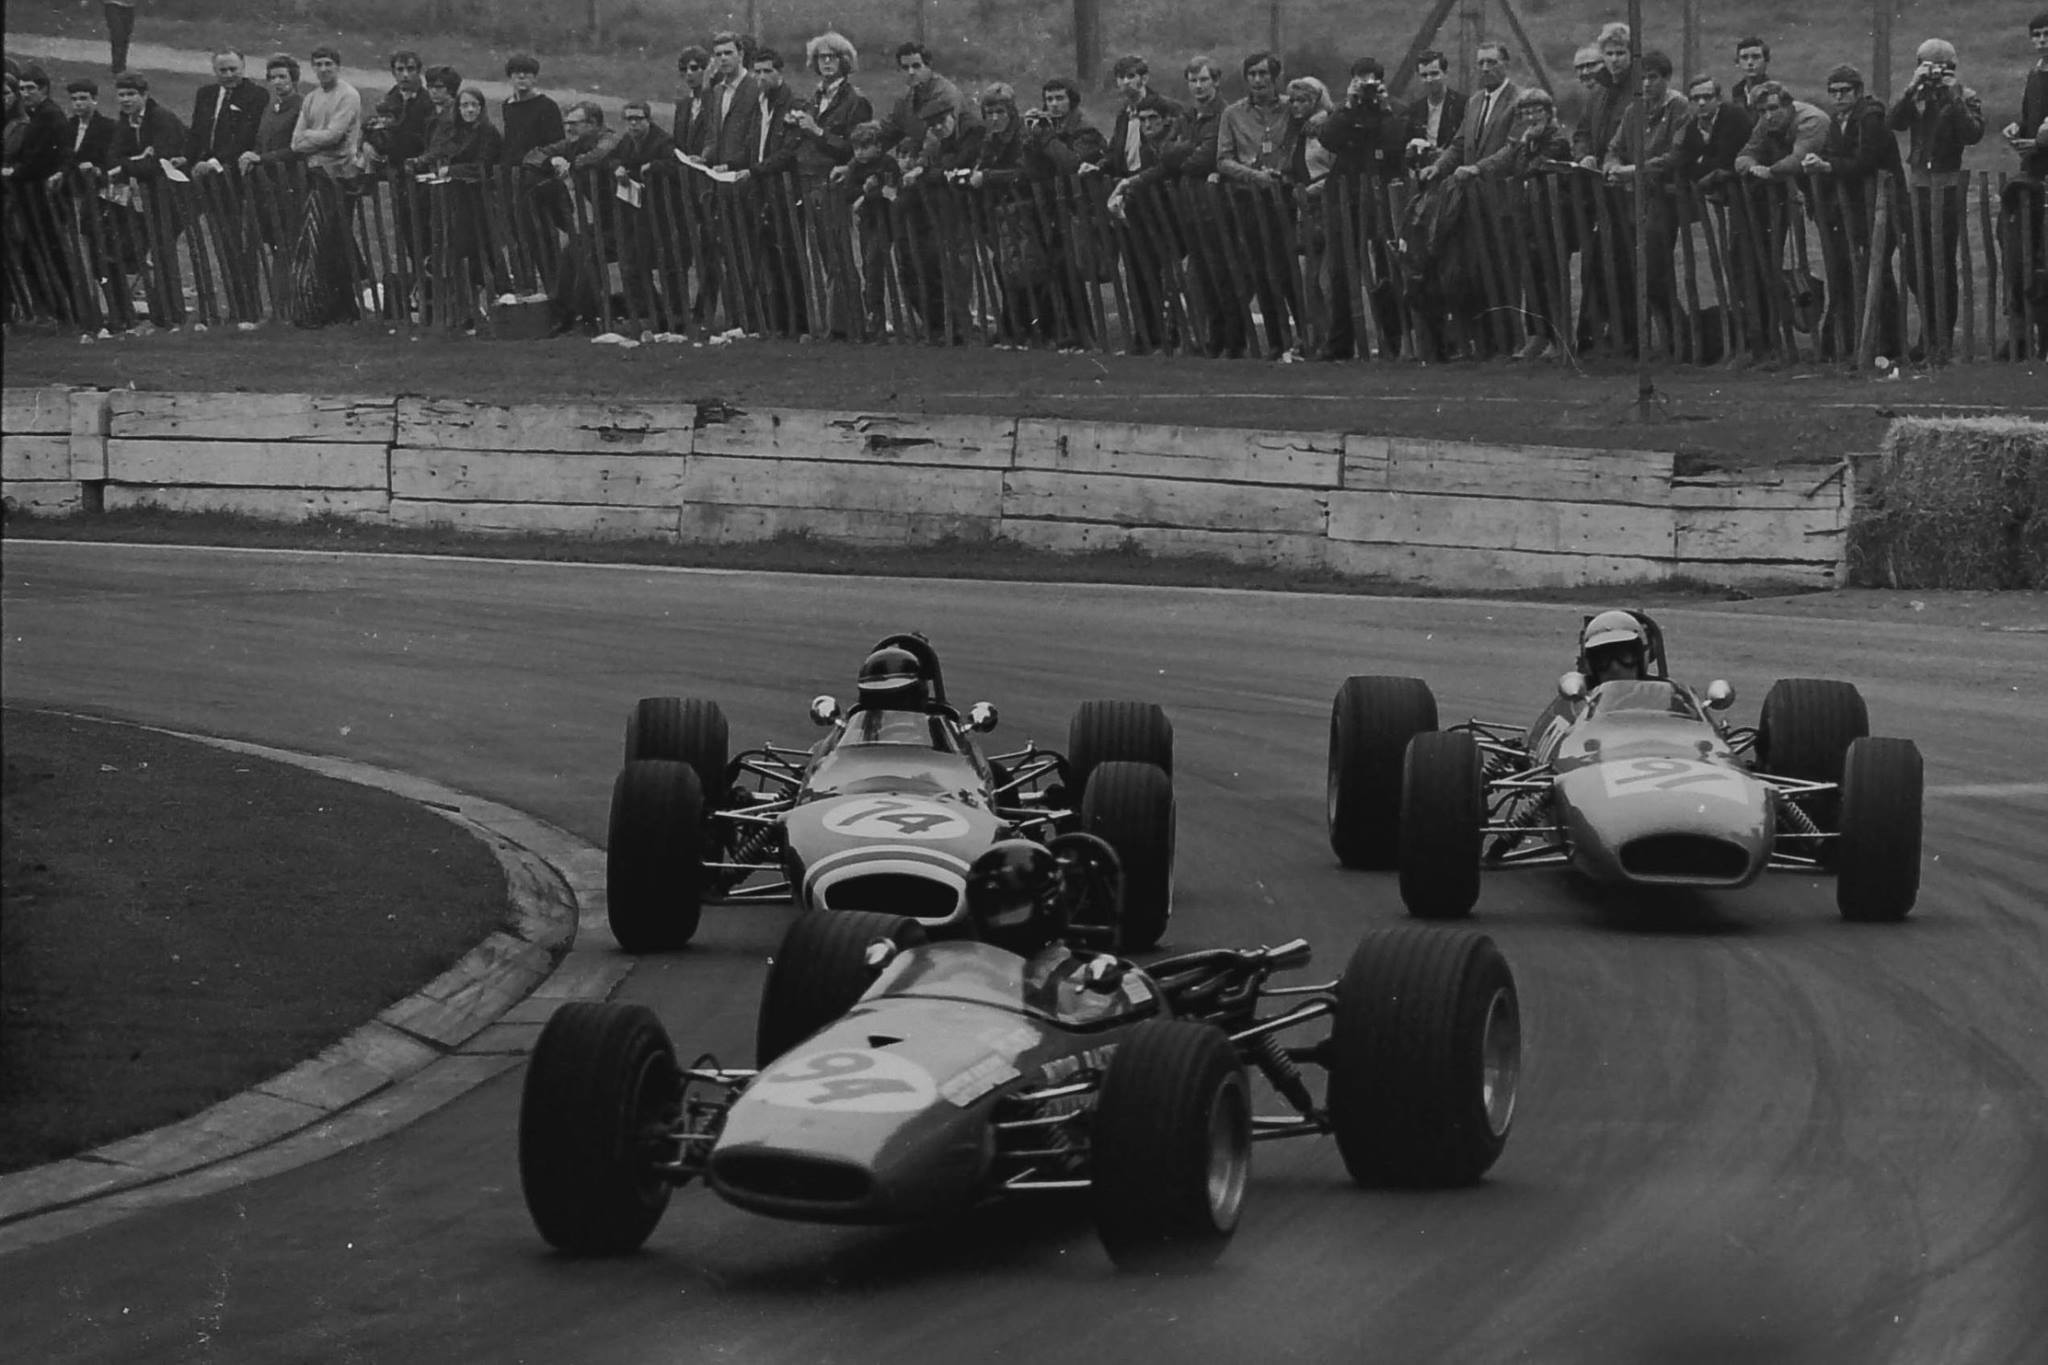 James Hunt driving a Lotus 59 in Formula 3 in 1969 at Crystal Palace.